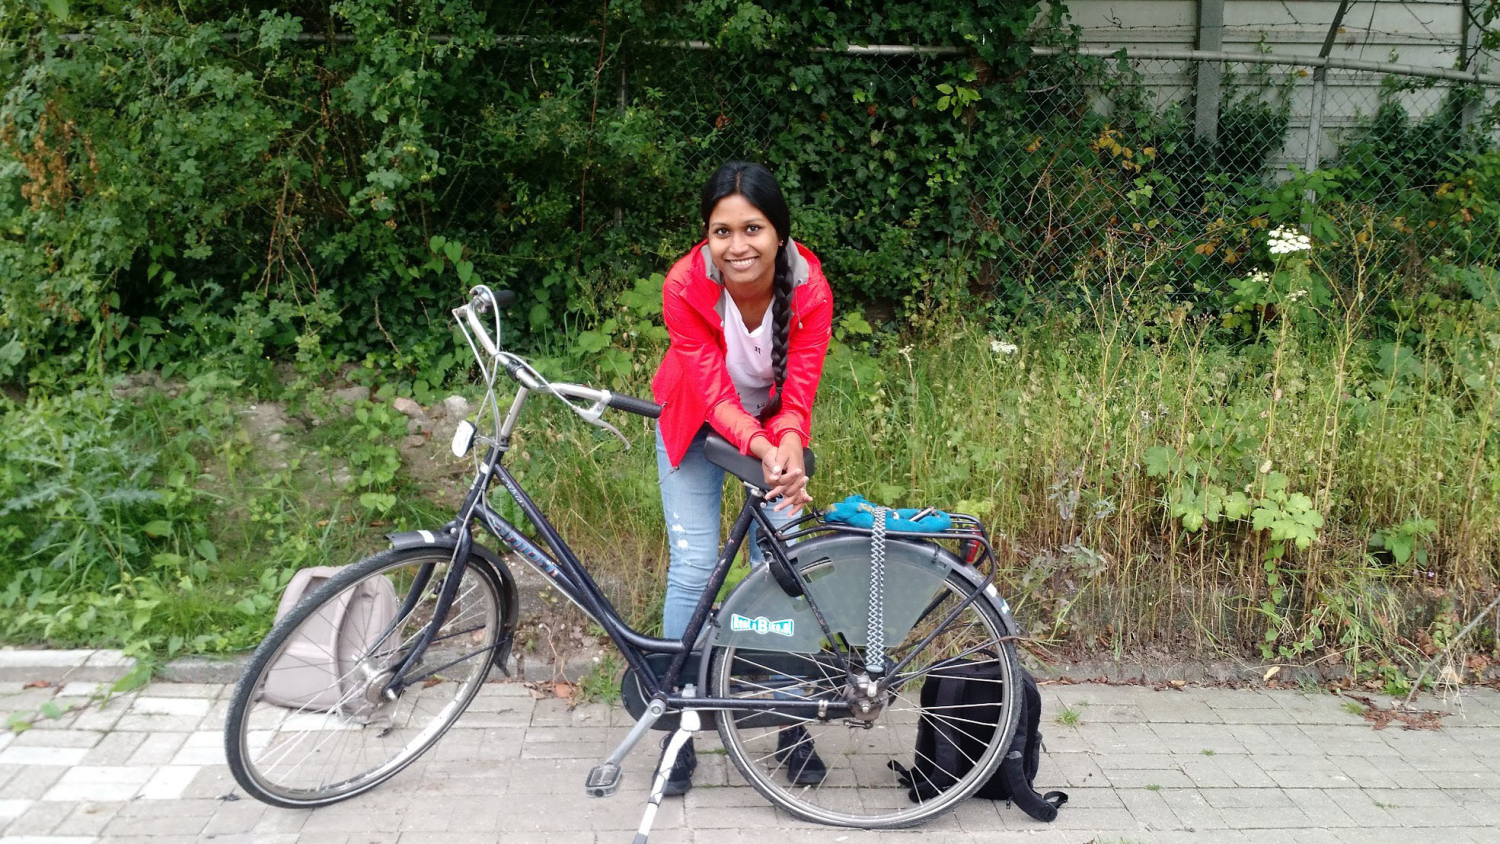 Sanjana Curtis leaning against a bicycle